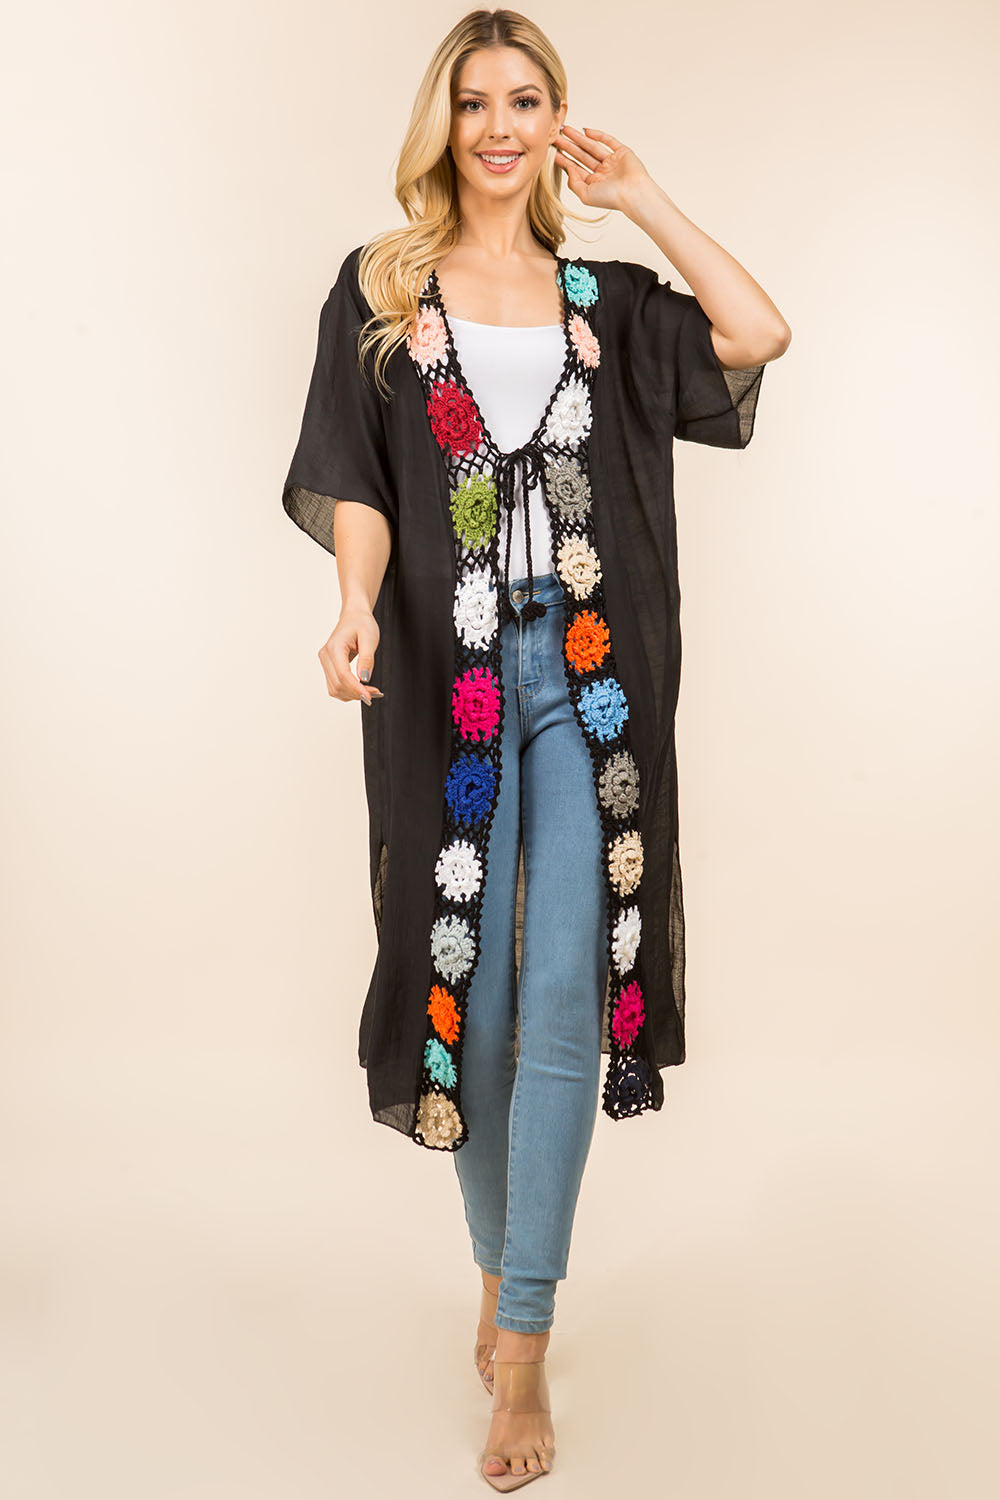 KP-4138 solid long kimono with crochet front ties